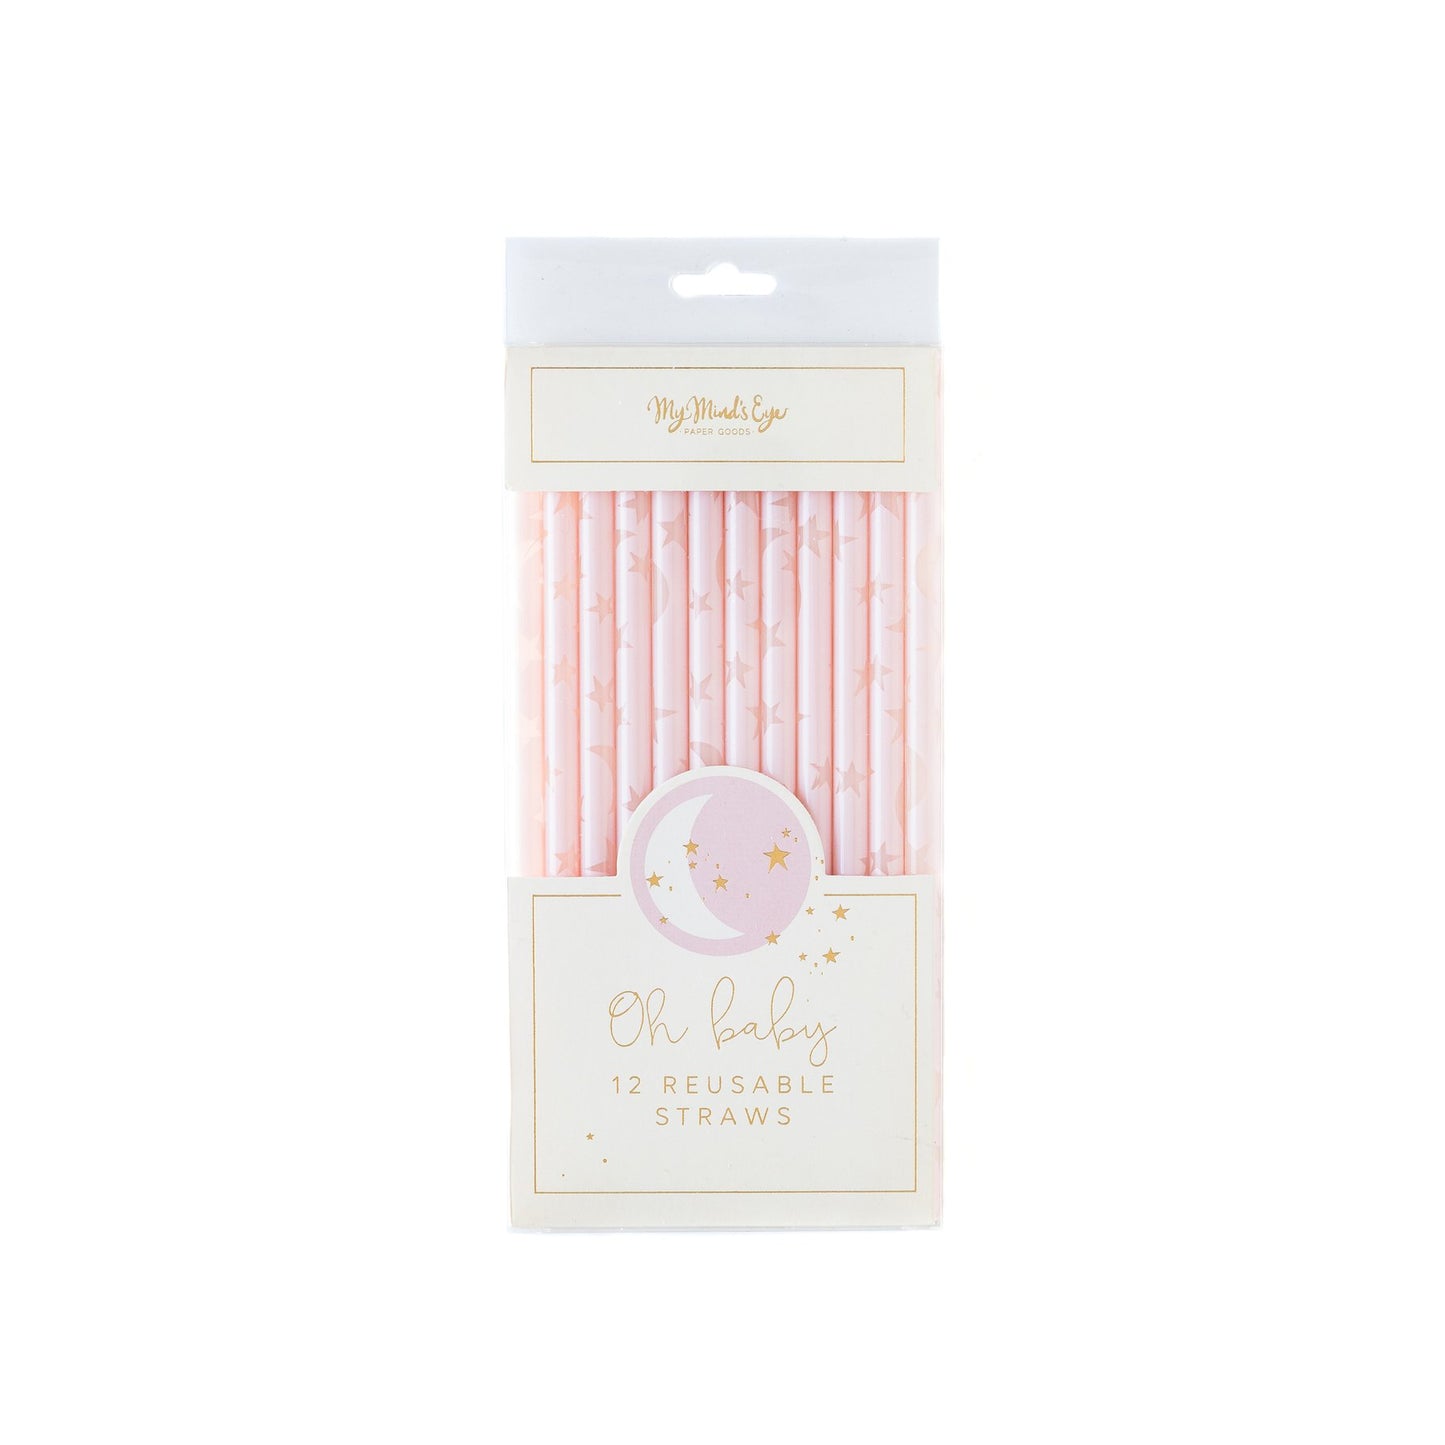 Oh Baby Reusable Straws in Pink (12 pk)